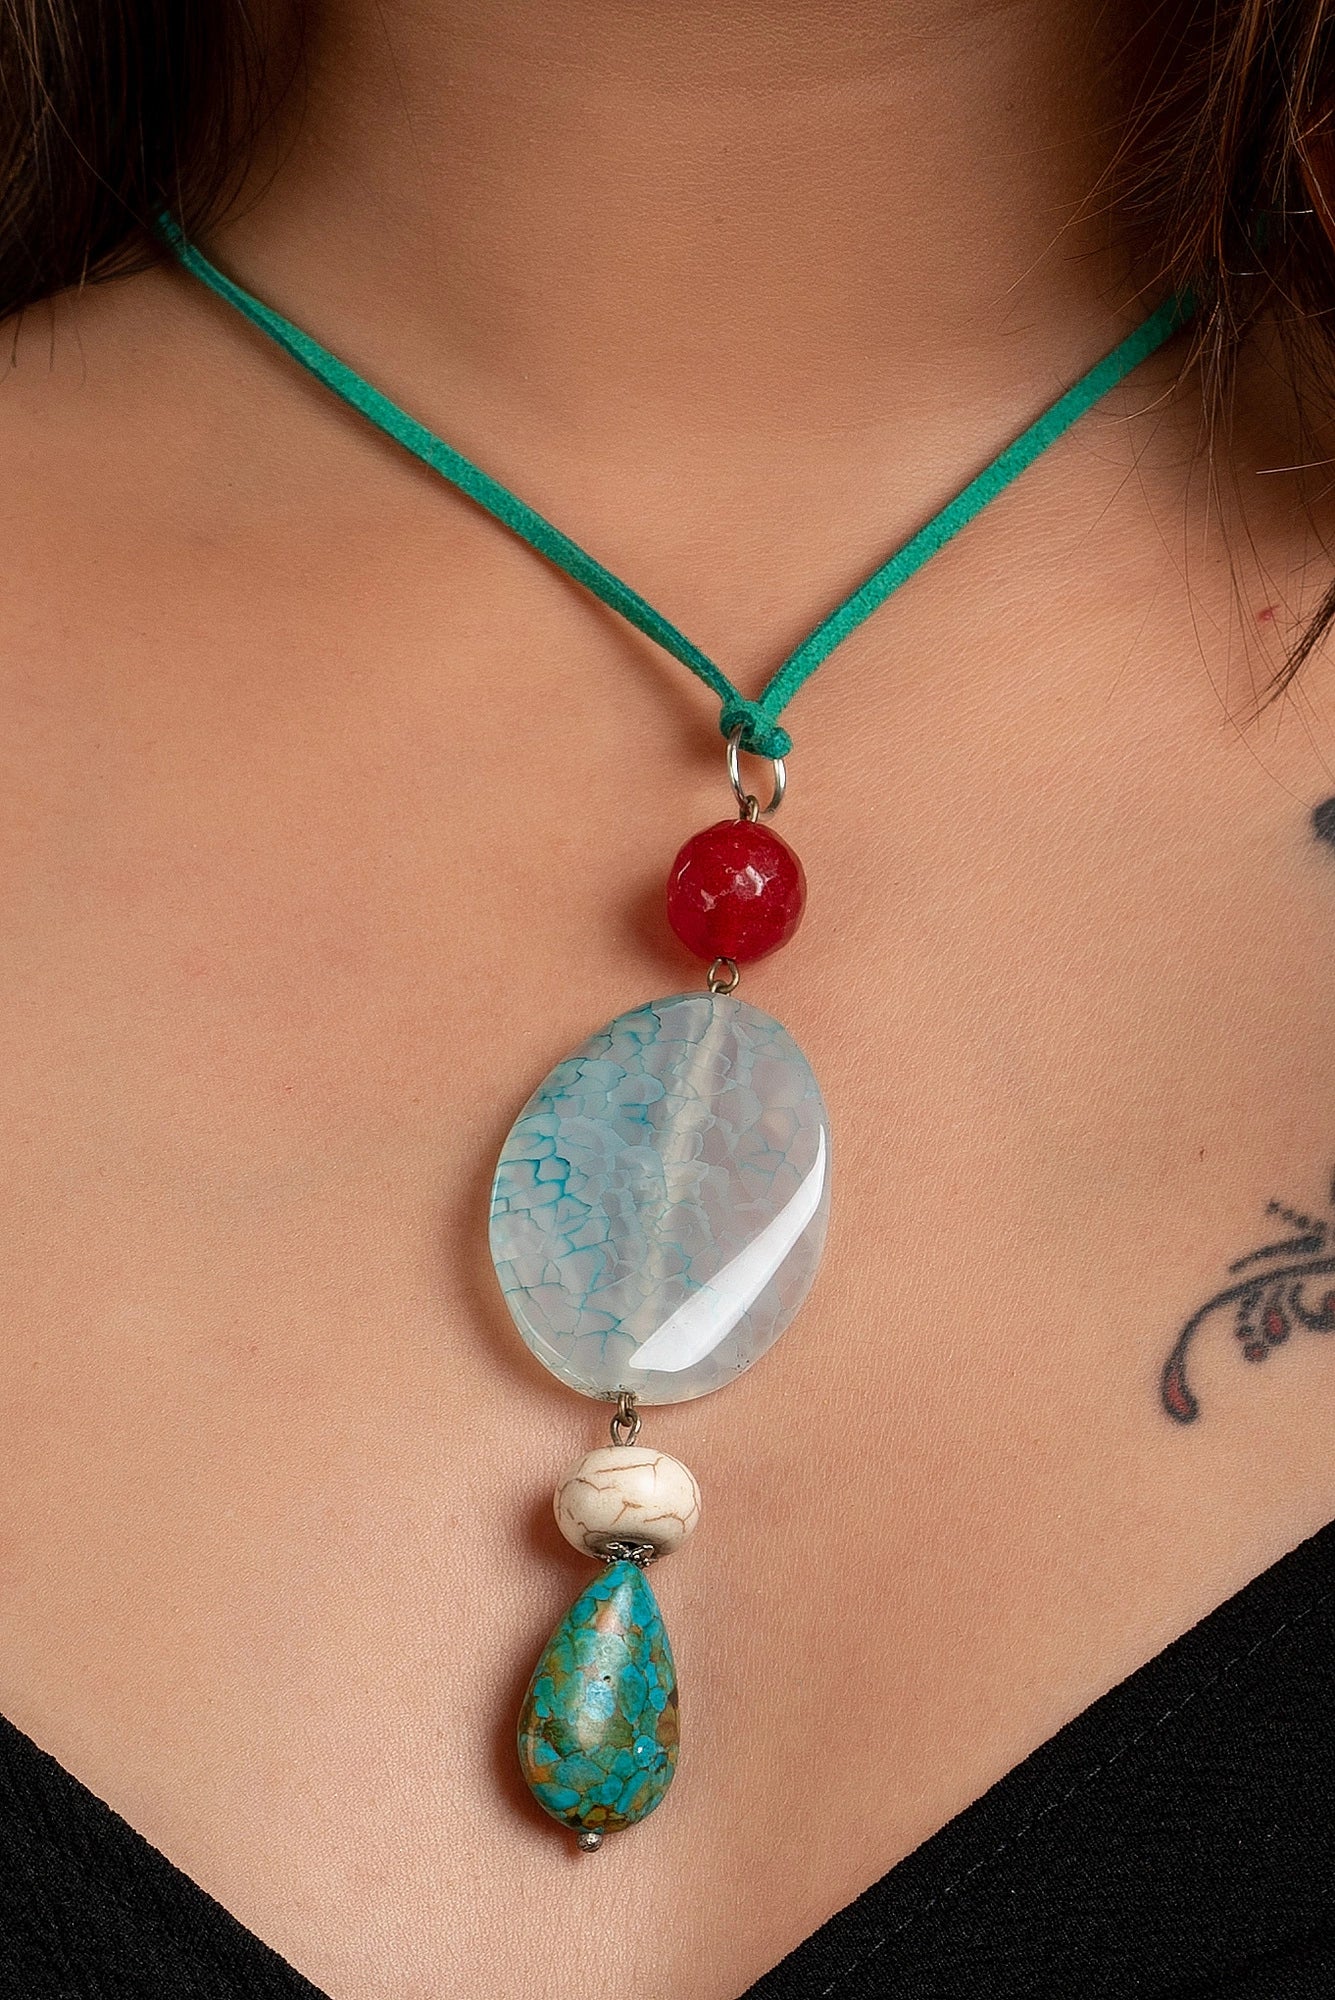 Designer Semi precious Agate Turquoise Onyx Pendant Strung with Adjustable Suede cord